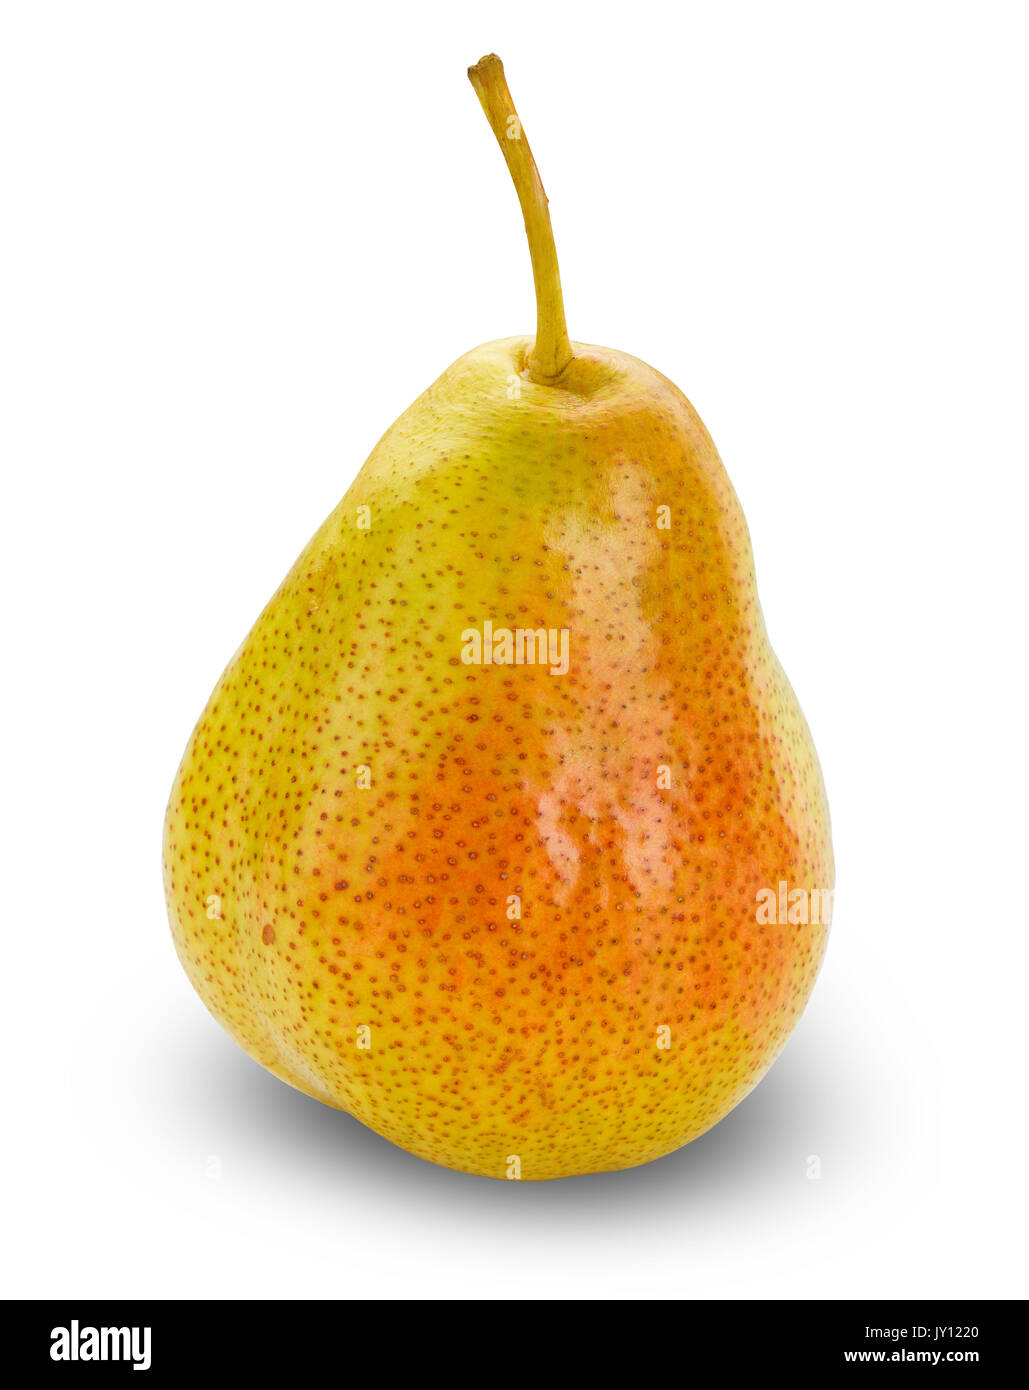 Pear isolated on white background with clipping path Stock Photo